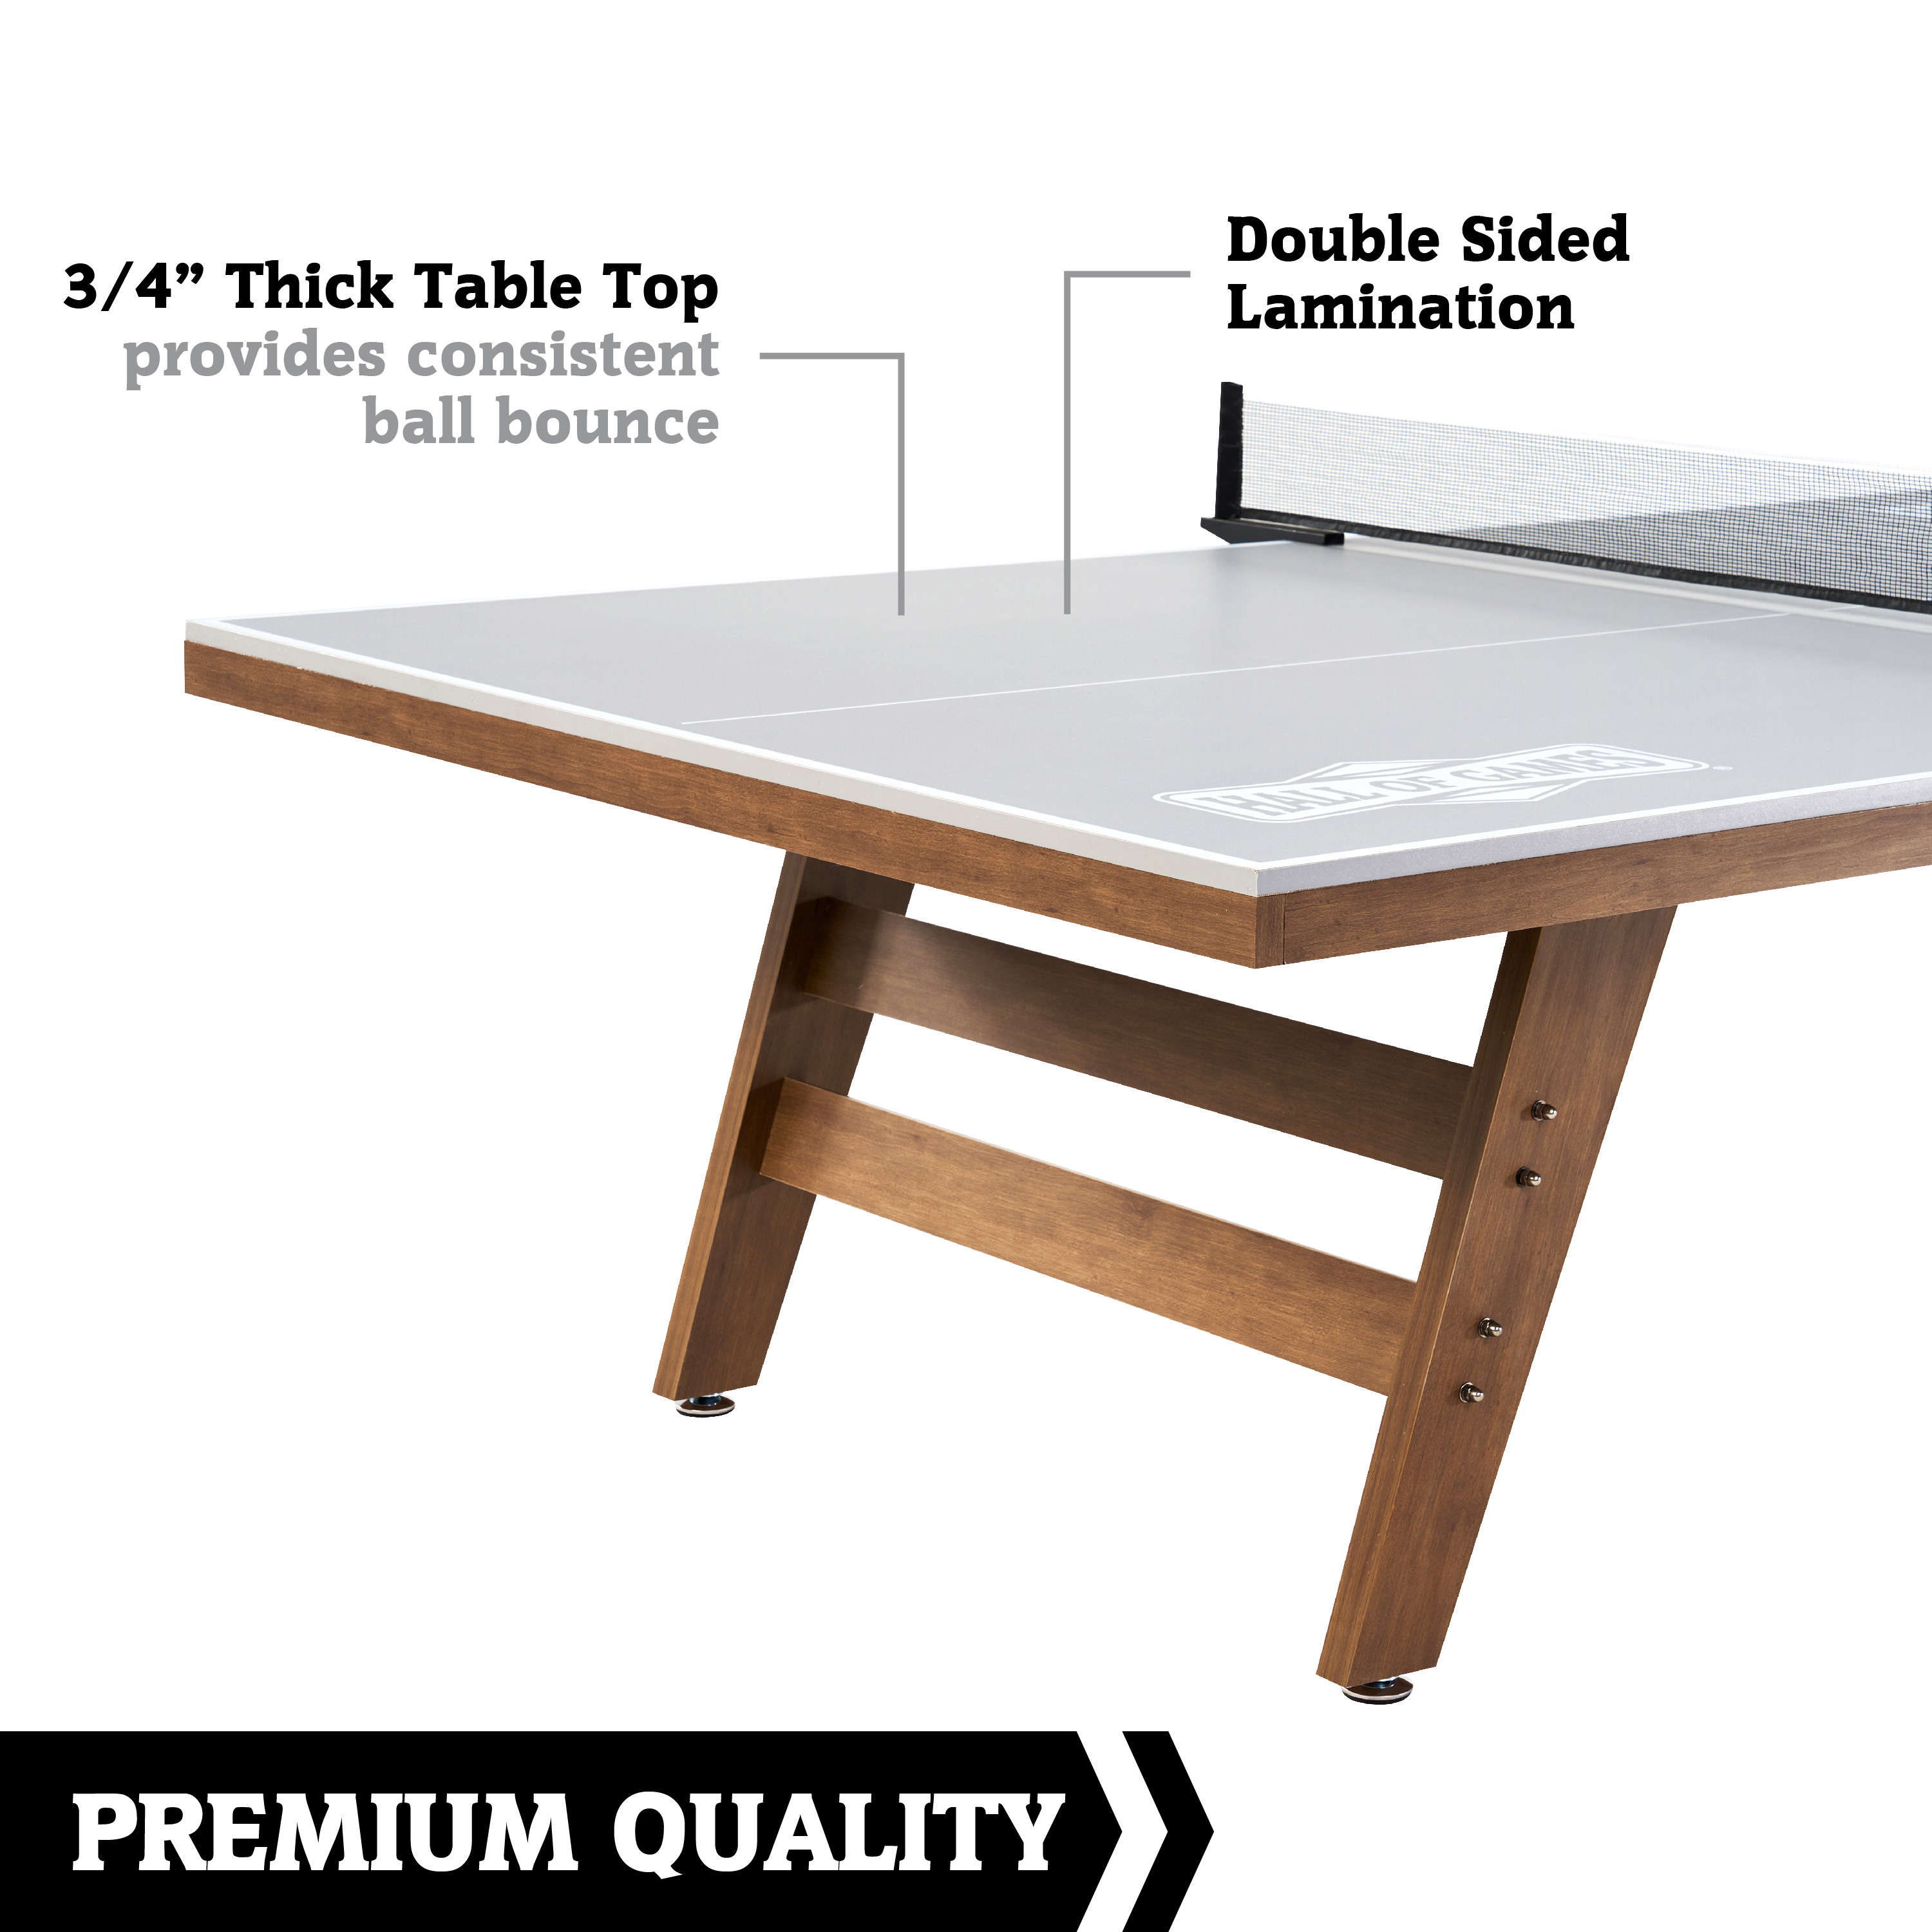 Hall of Games Regulation Size Indoor Table Tennis Table, 19mm Thick - image 4 of 9